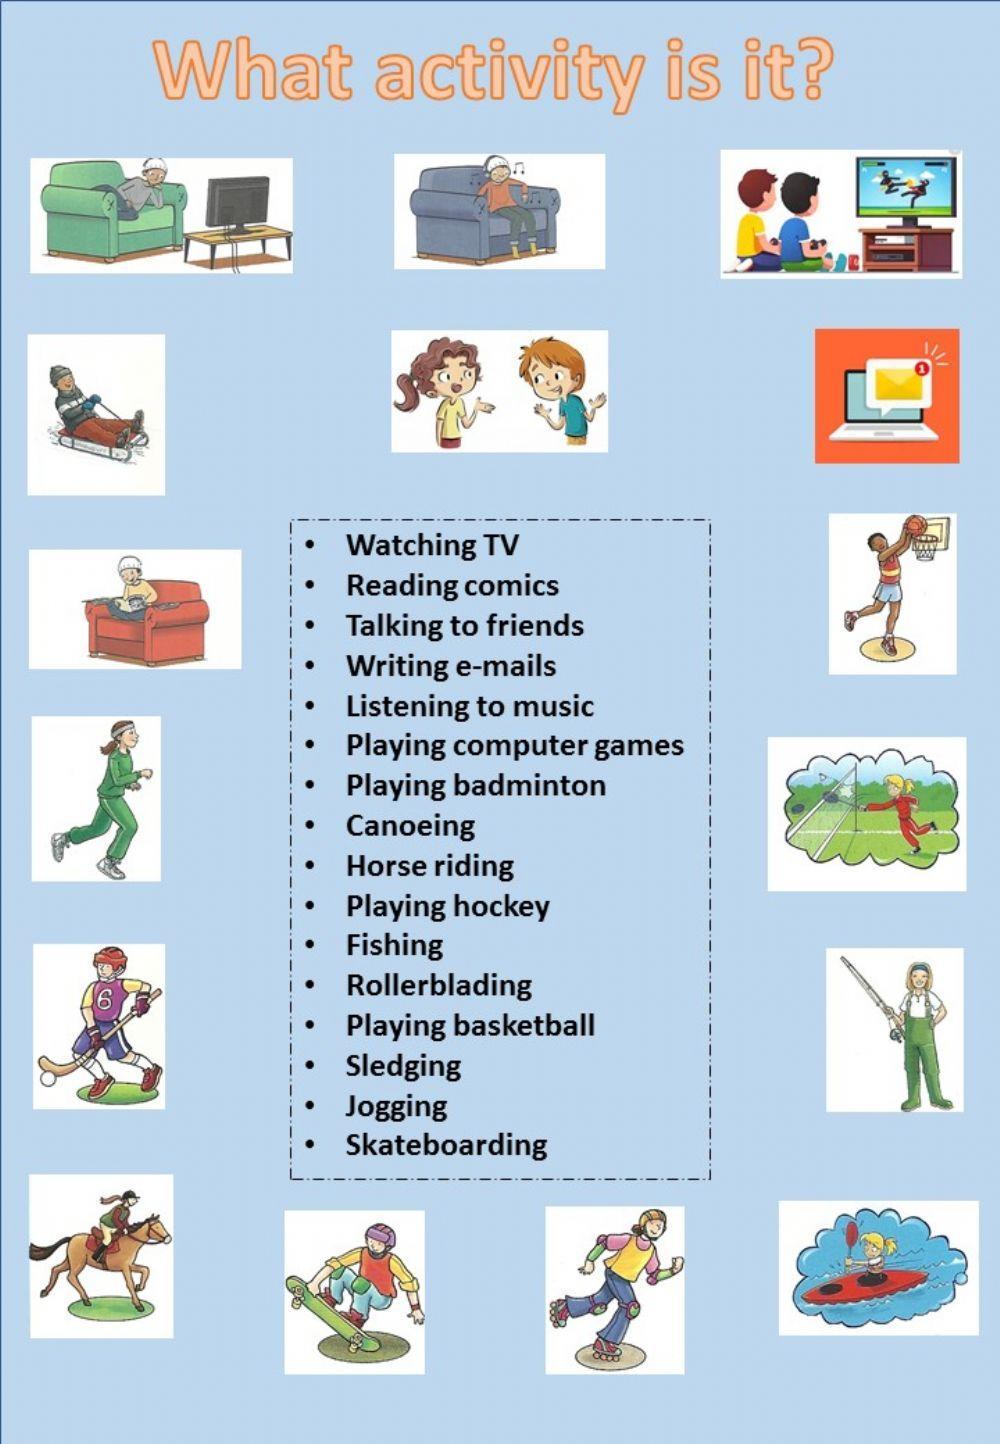 Free Time activities and sports